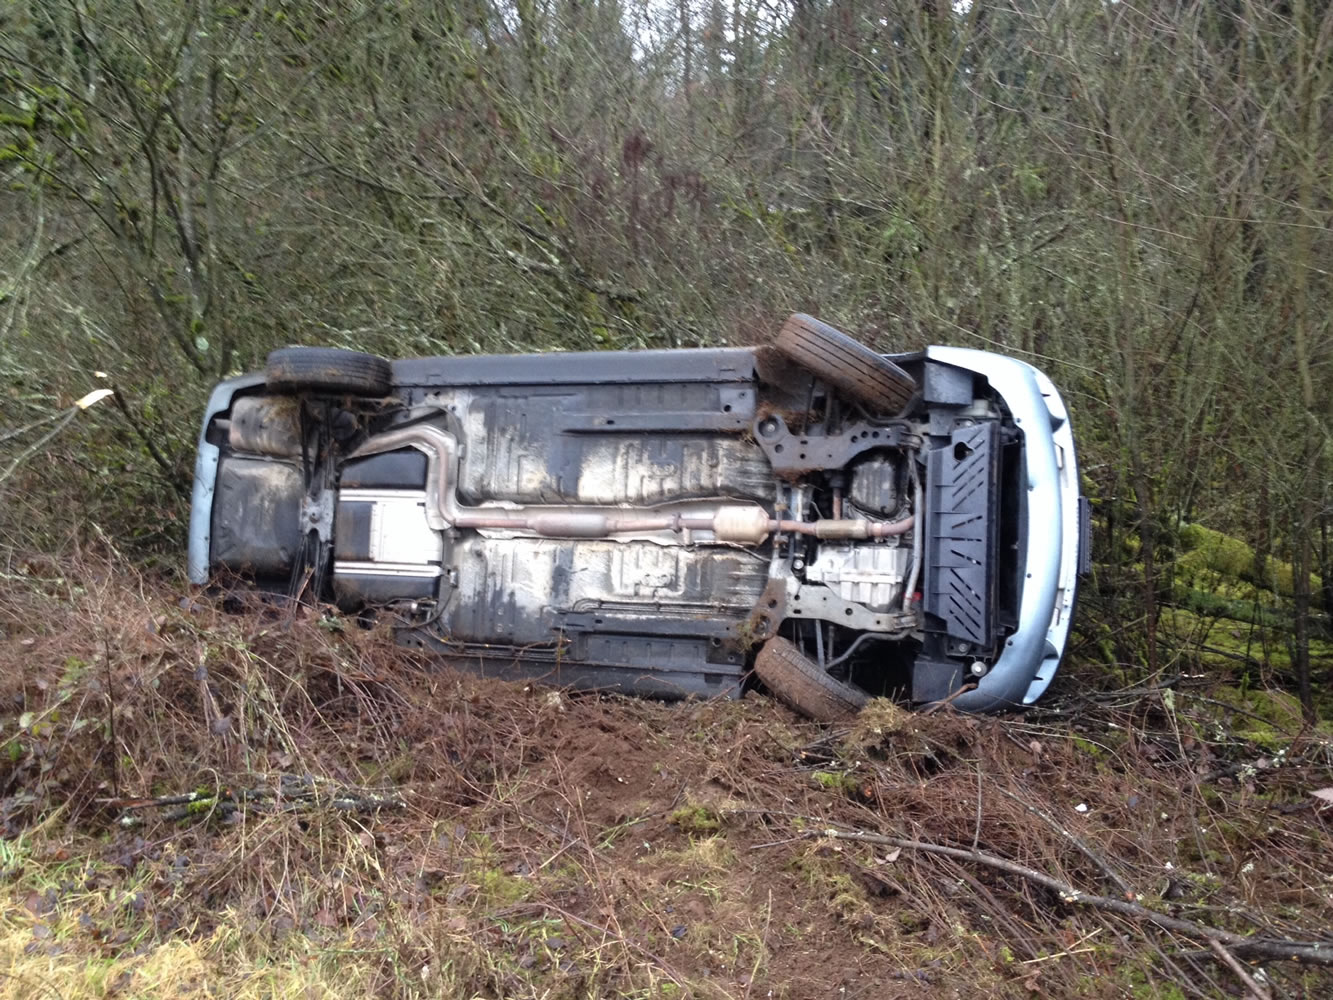 Washington State Patrol is investigating a rollover crash on the state Highway 500 onramp to Interstate 205.